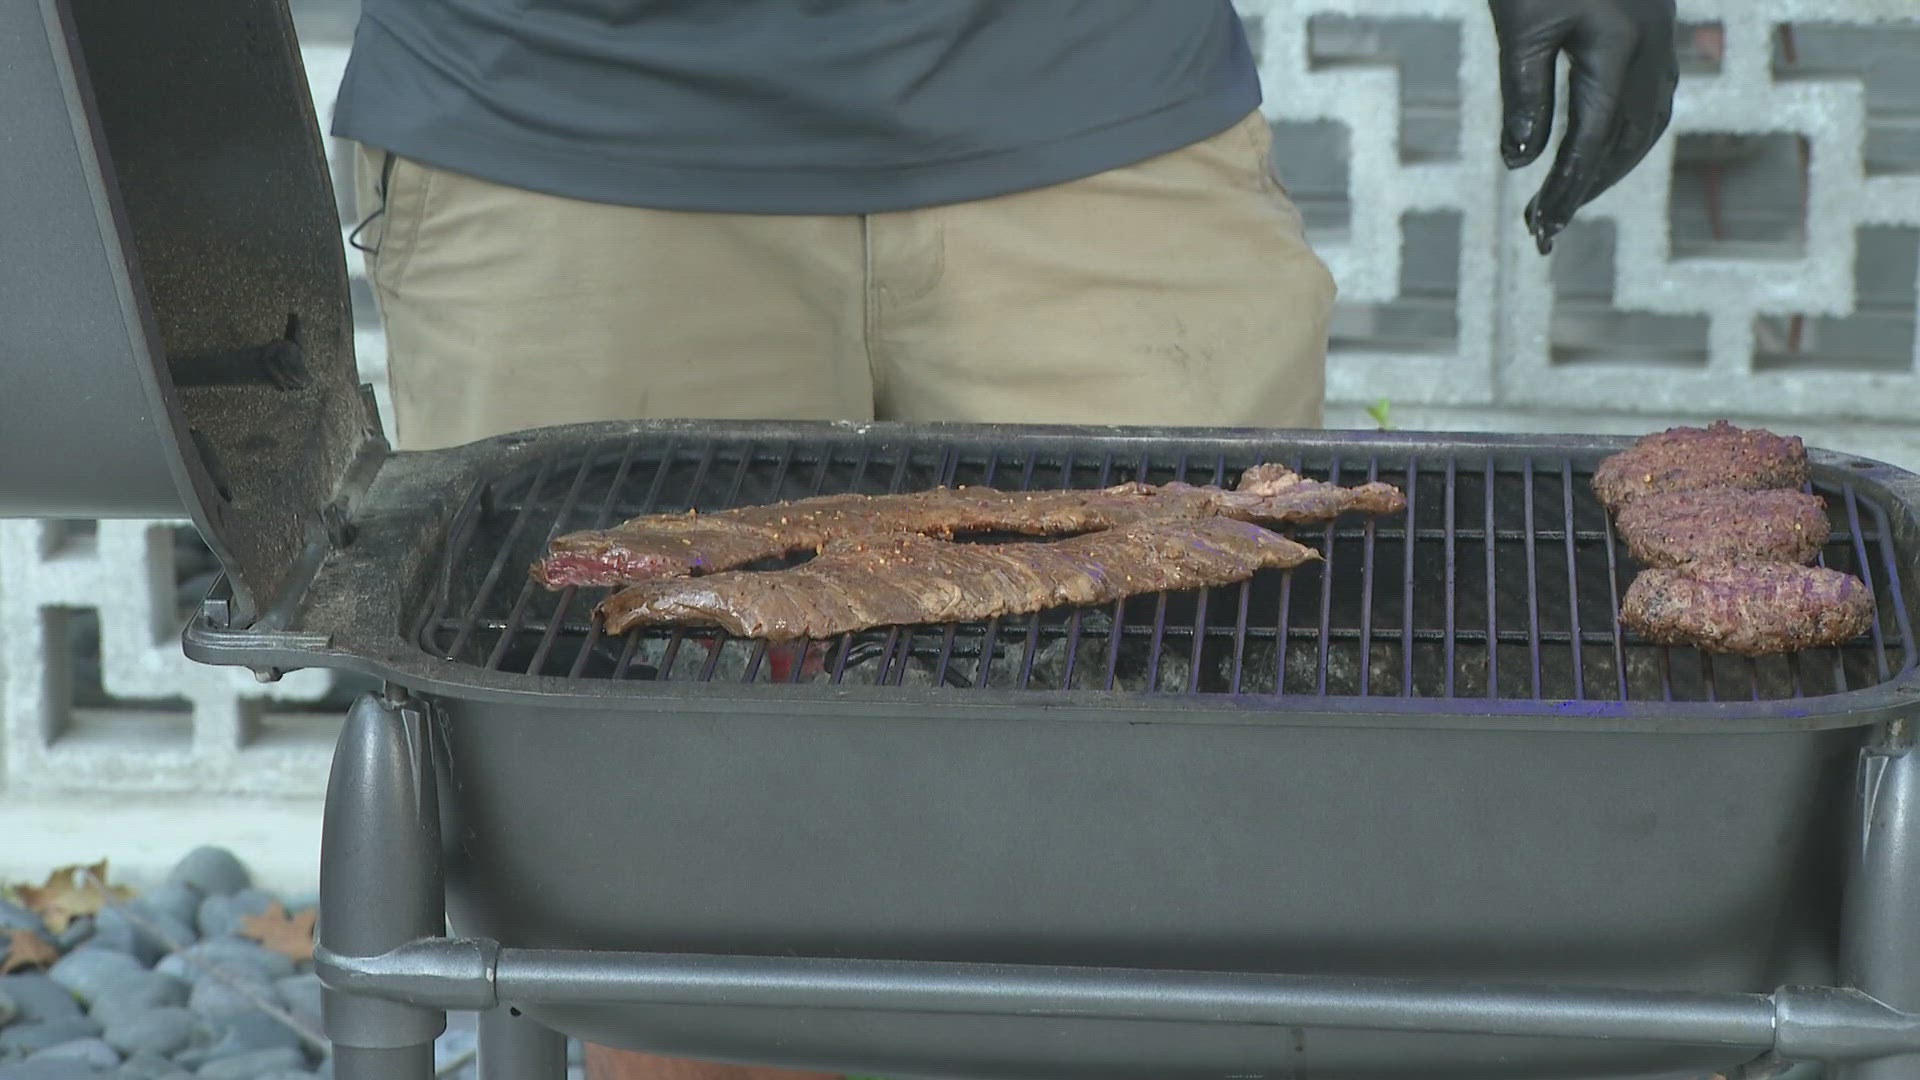 Austin pit master and Slabbs BBQ co-founder Mark Avalos shares grilling tips to keep in mind.